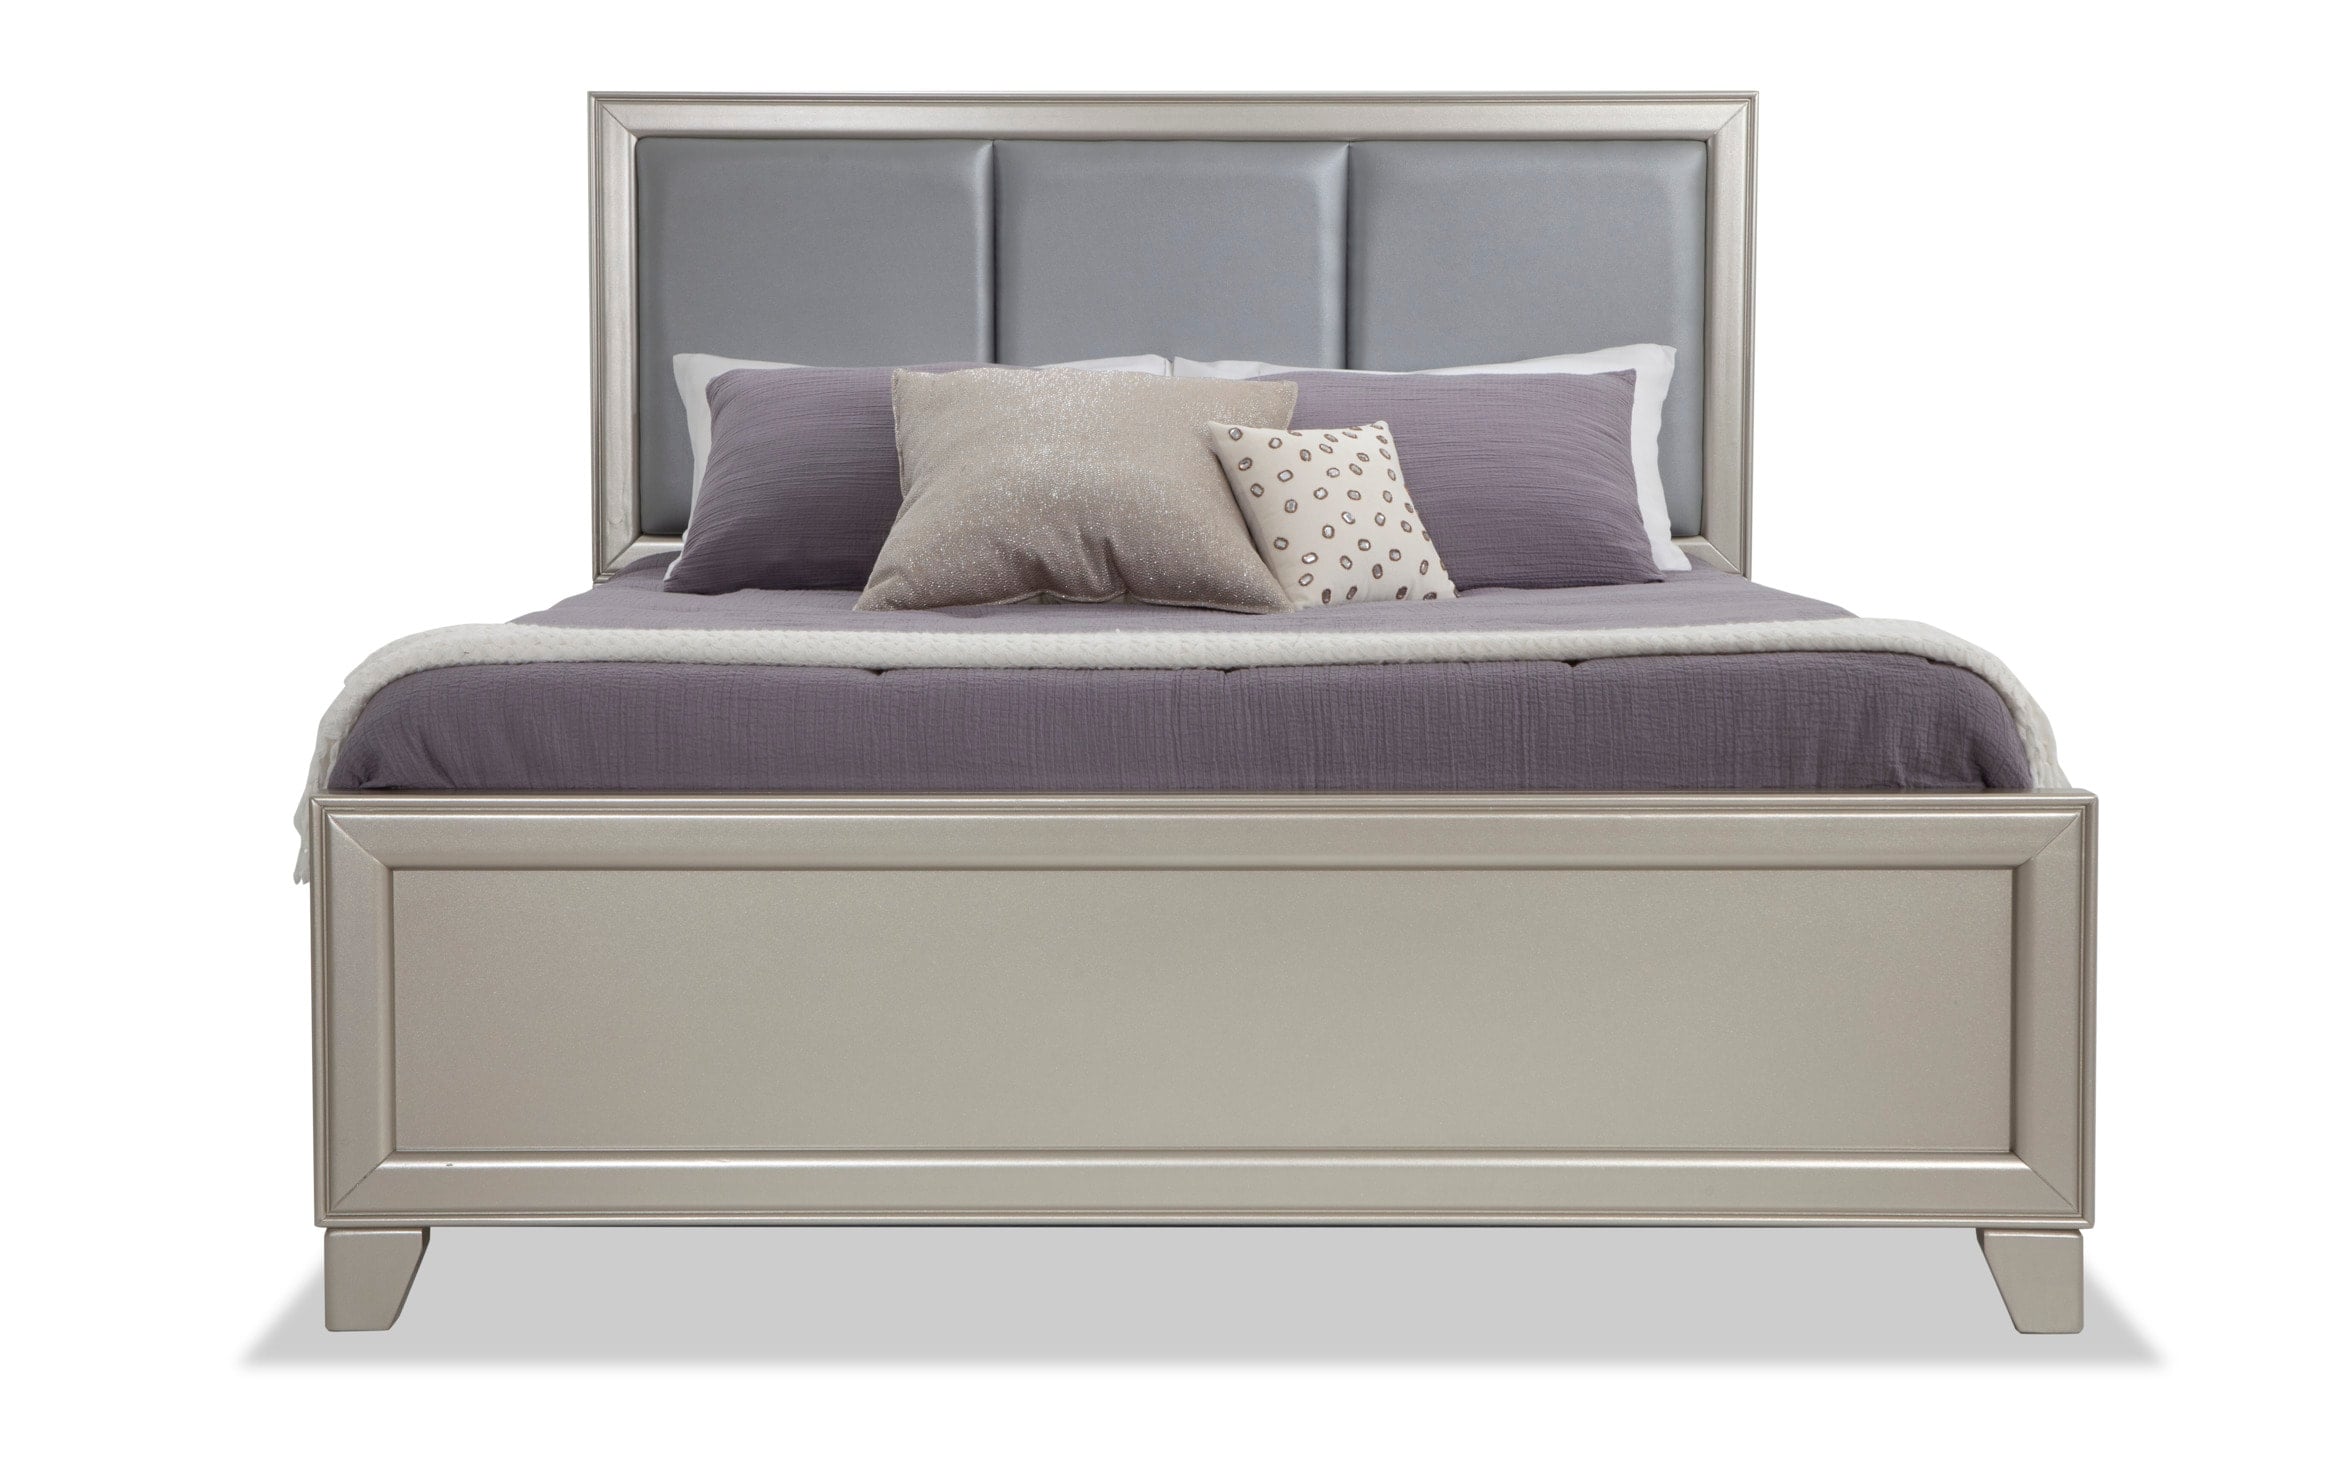 Tahiti Guinness Ezel Jem Upholstered Queen Bed | Outlet | Bob's Discount Furniture